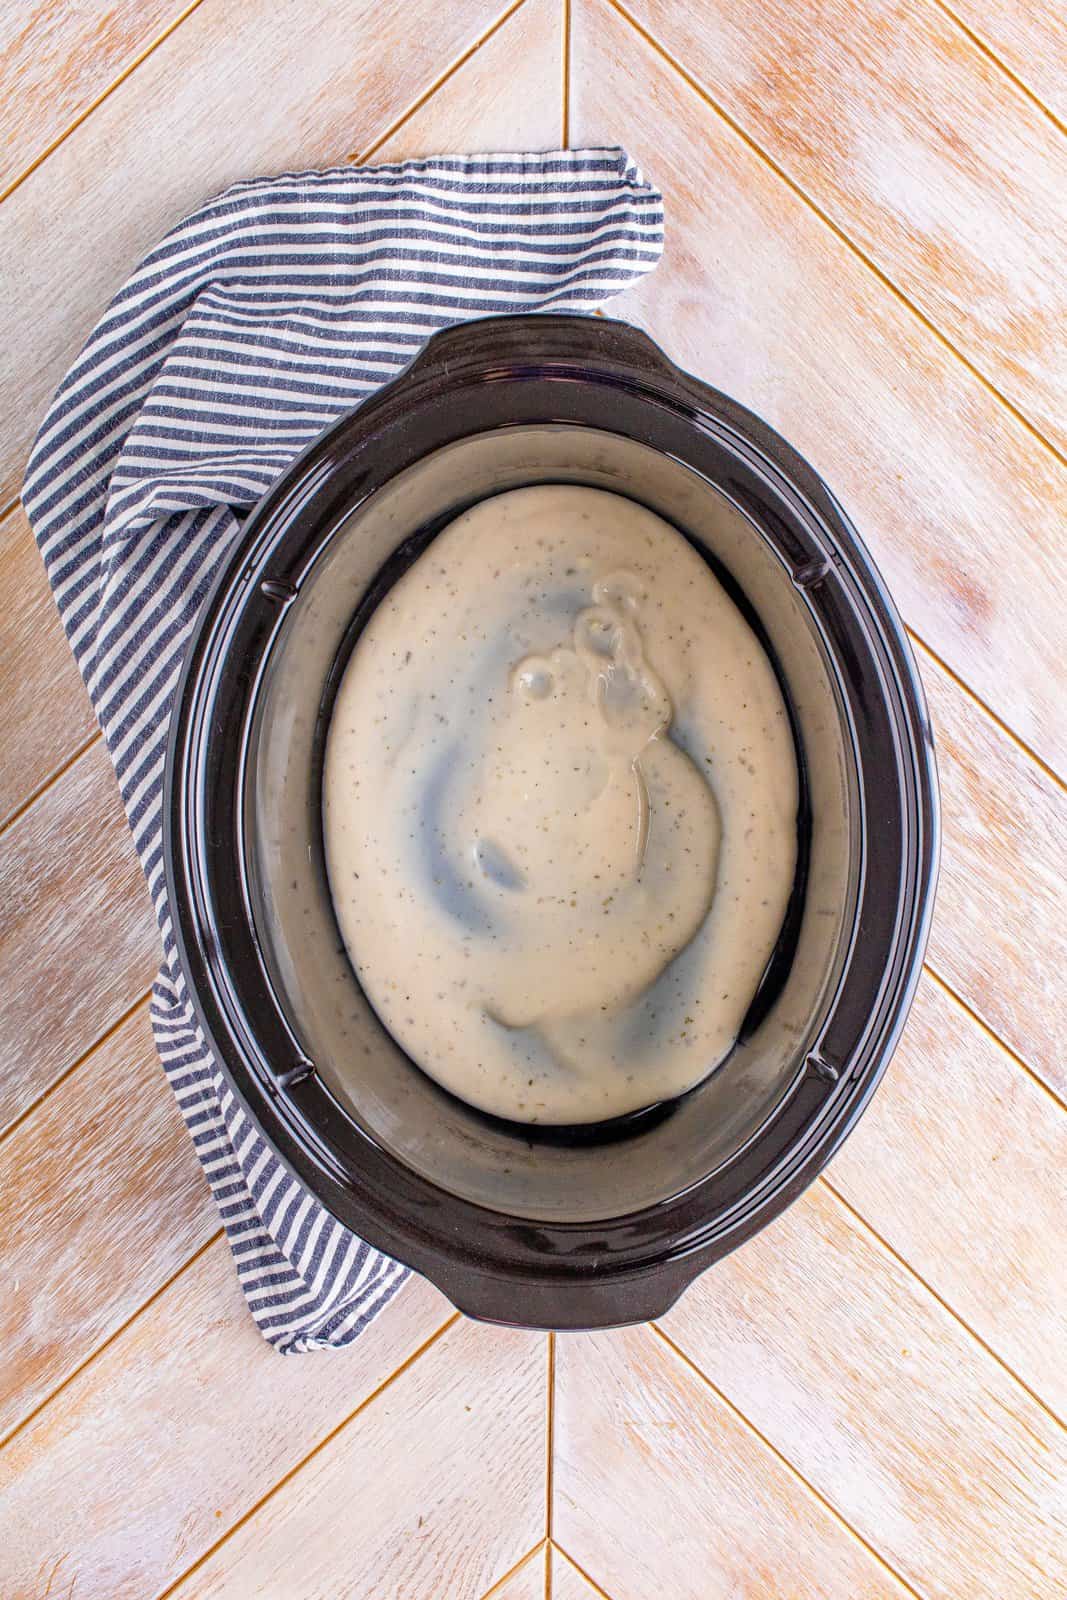 Alfredo sauce spread evenly into the bottom of an oval slow cooker.